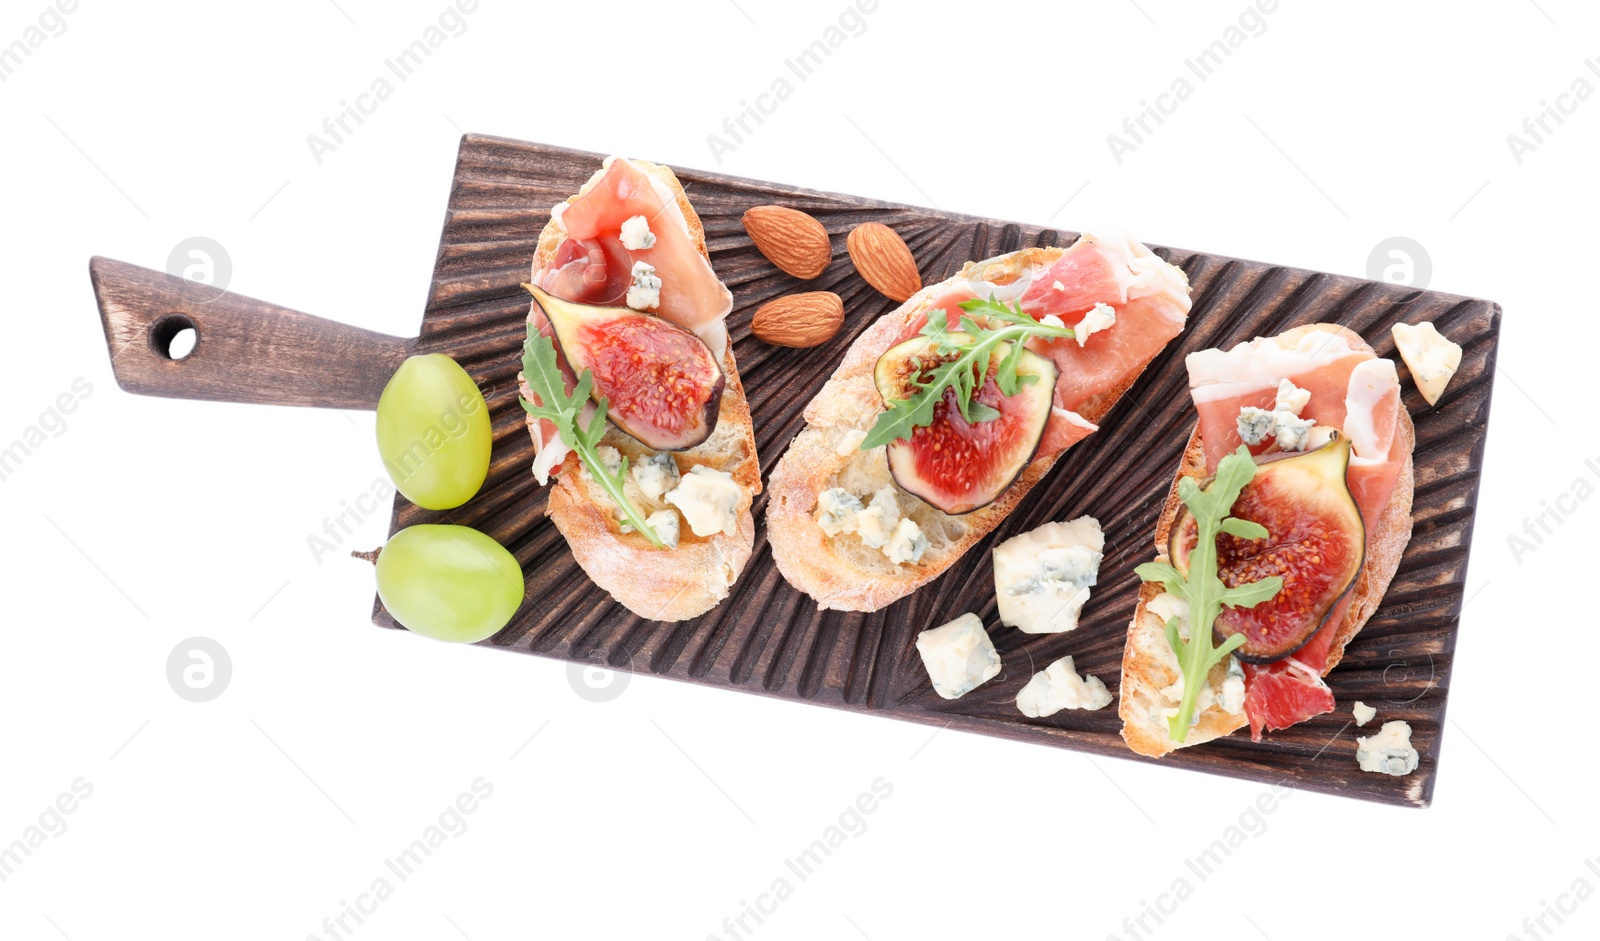 Photo of Sandwiches with ripe figs and prosciutto on white background, top view